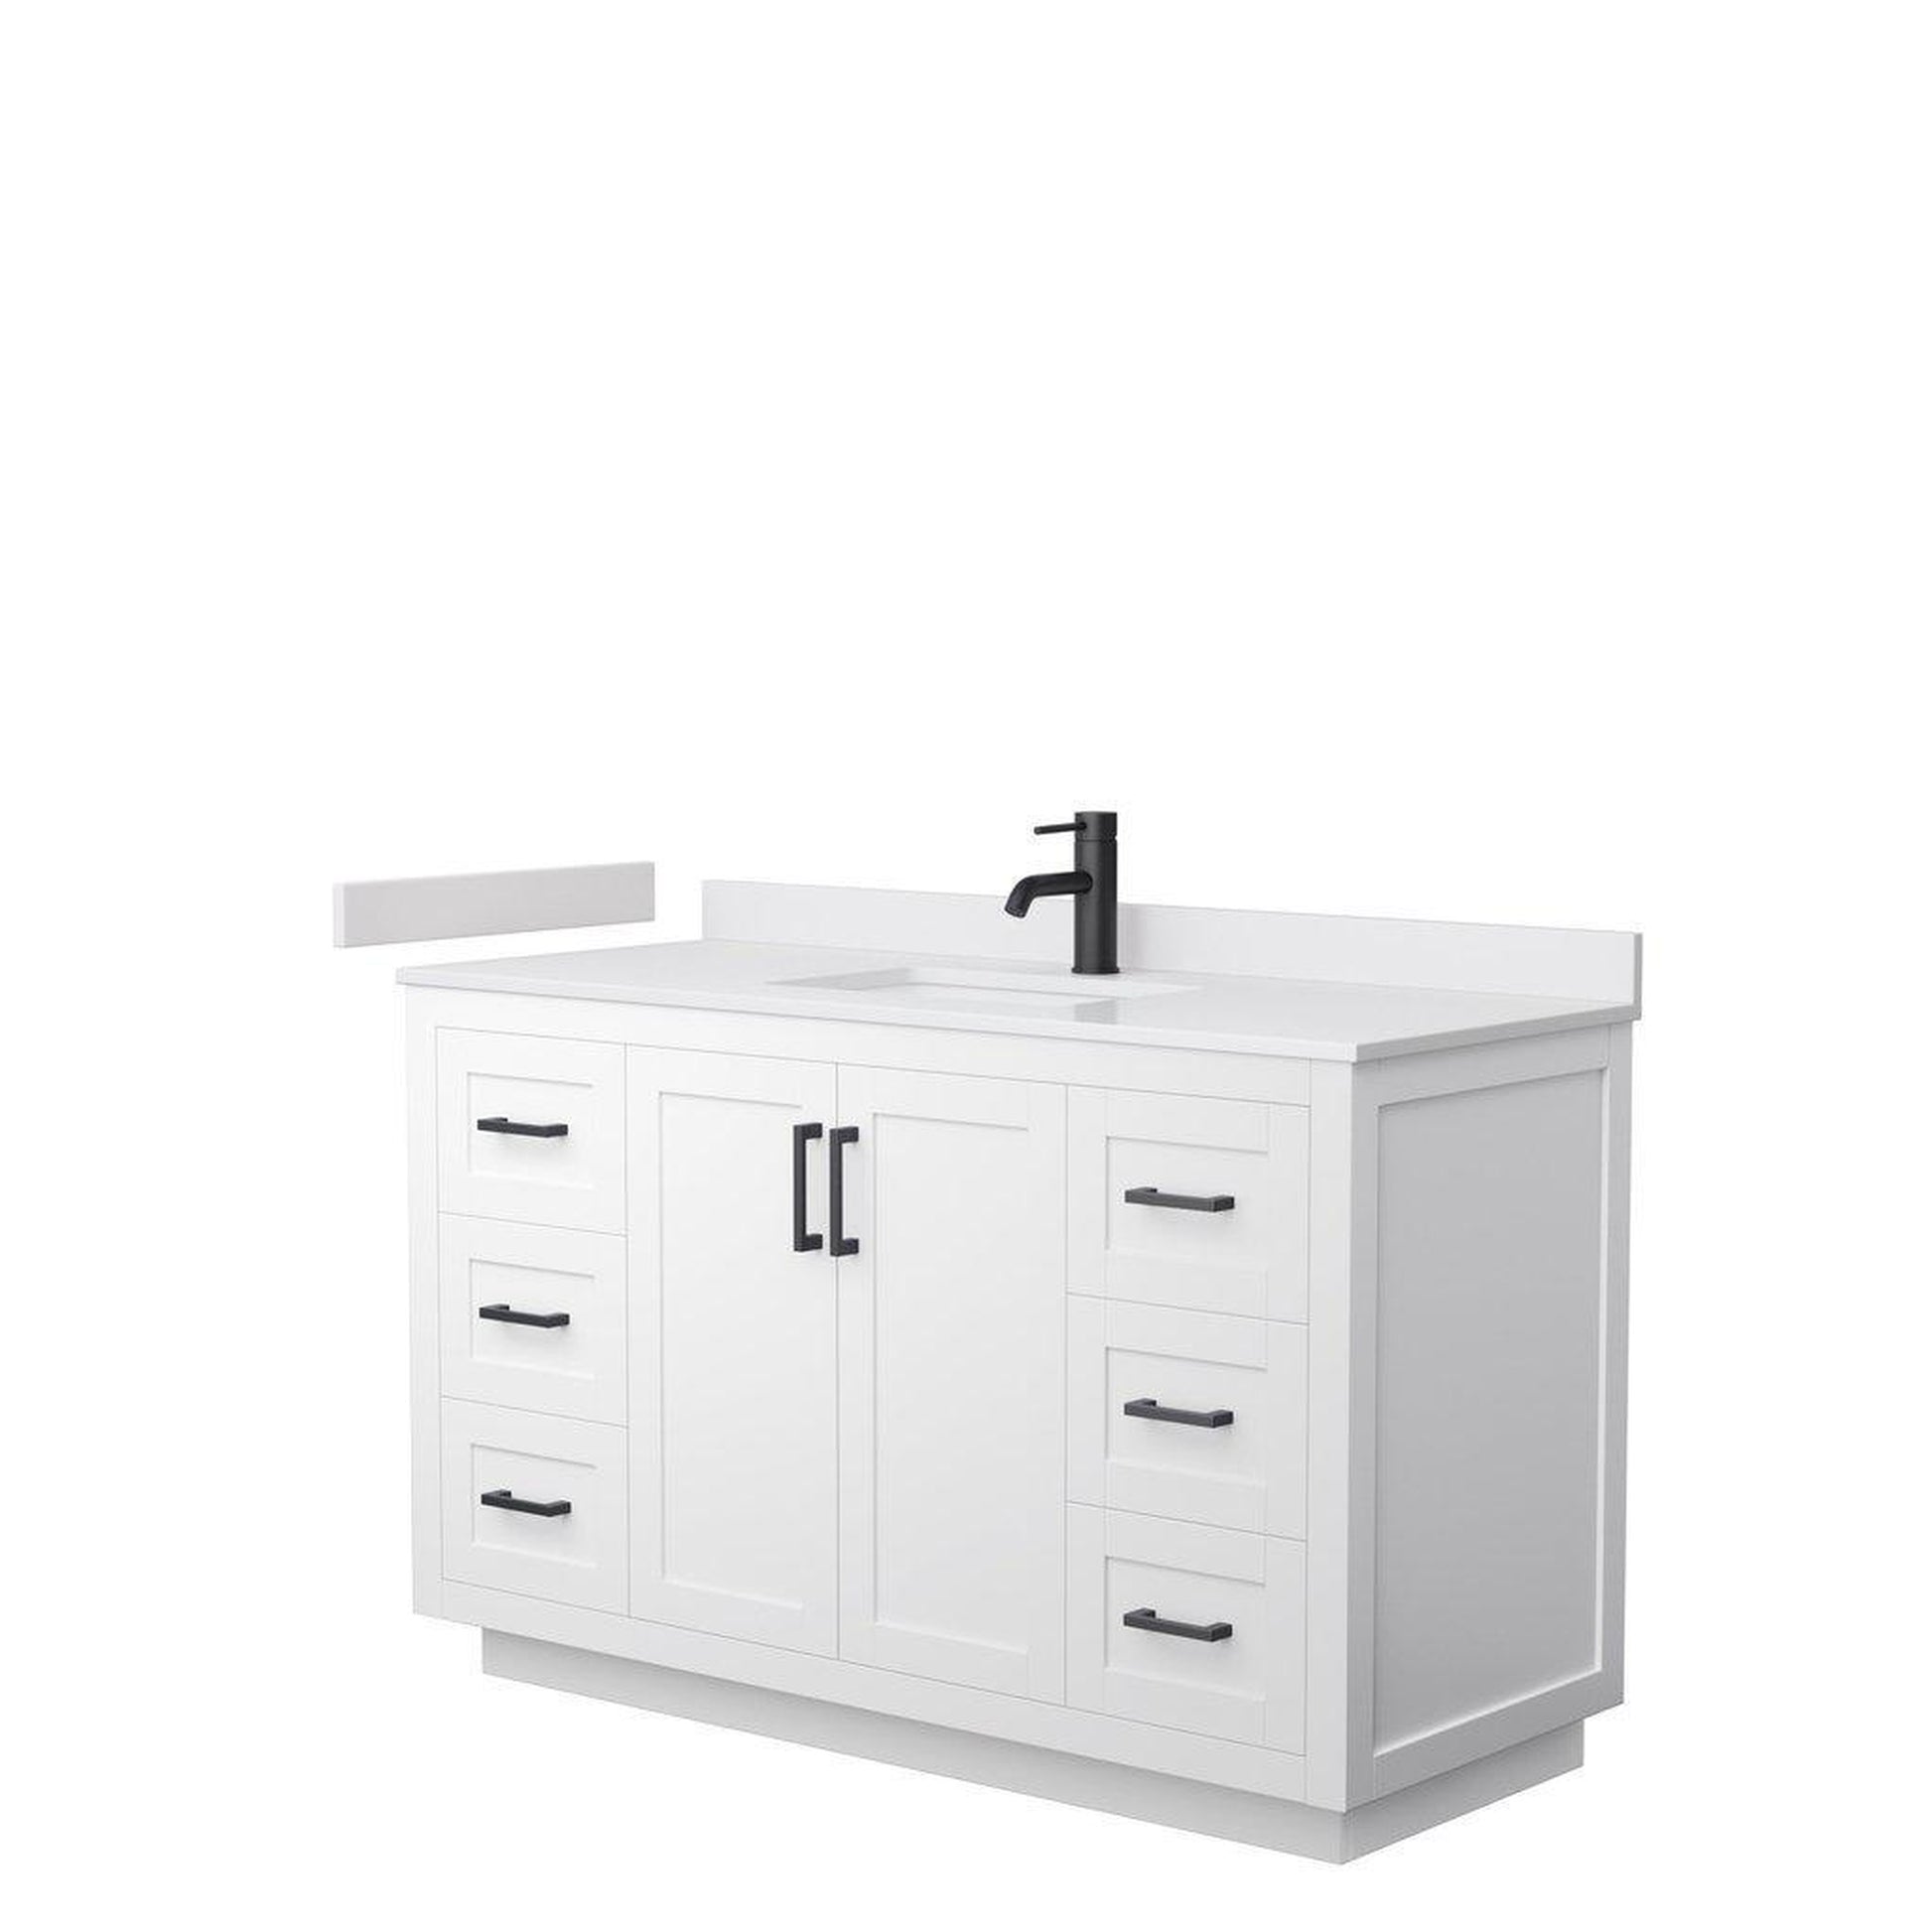 Wyndham Collection Miranda 54" Single Bathroom White Vanity Set With White Cultured Marble Countertop, Undermount Square Sink, And Matte Black Trim